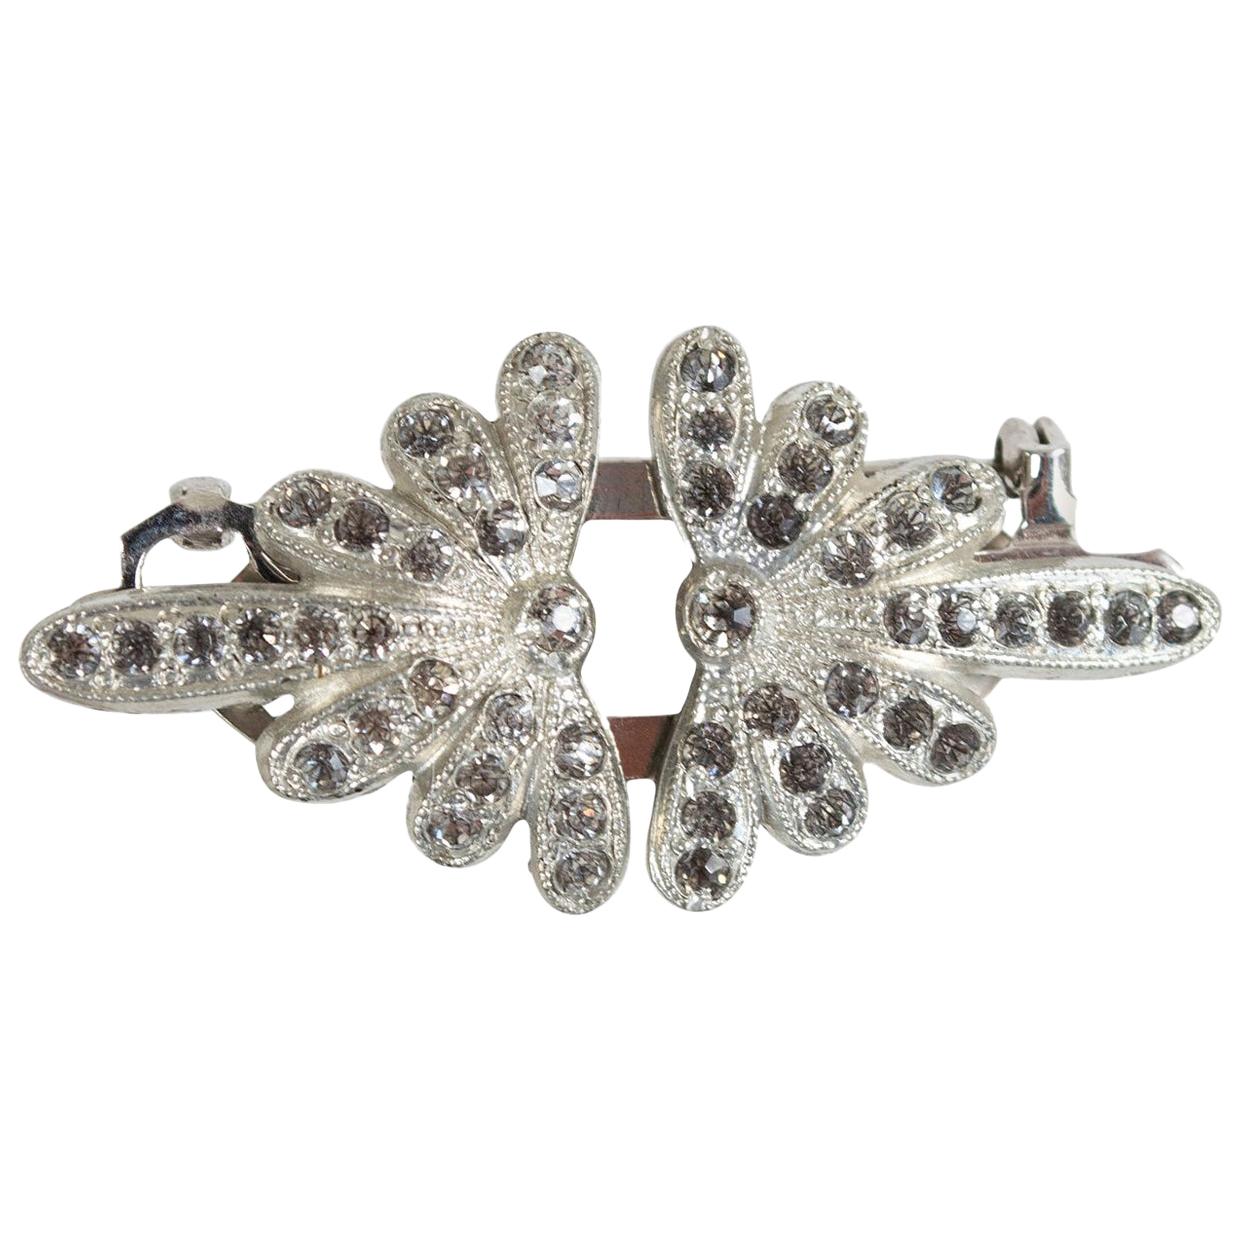 Signed Coro Duette Art Deco Silver and Marcasite Brooch and Dress Clip, 1940s